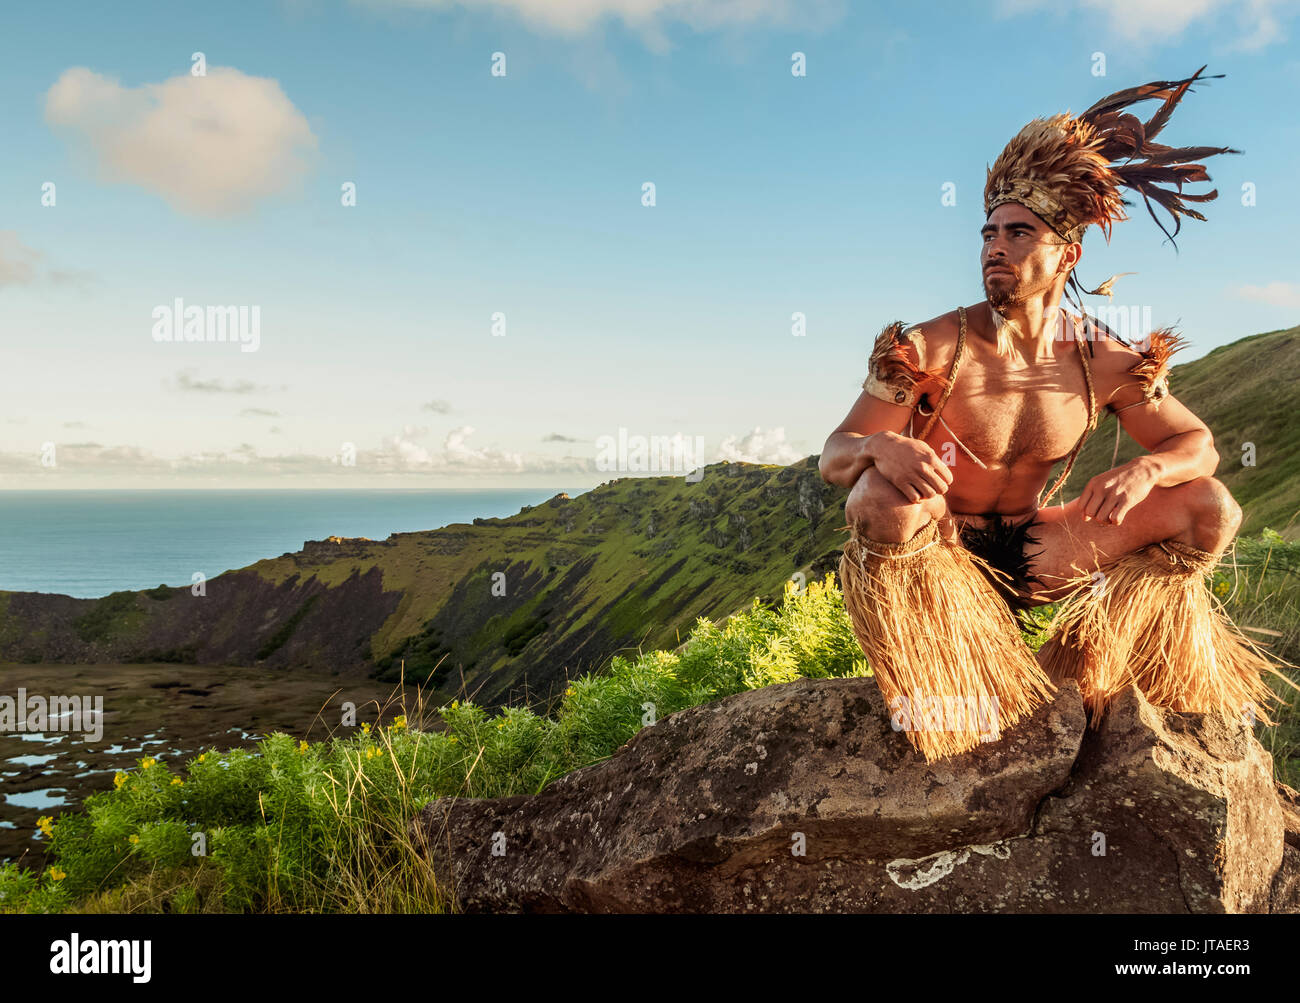 Native Rapa Nui man in tradititional costume on the rim of the Rano Kau Volcano, UNESCO, Easter Island, Chile Stock Photo